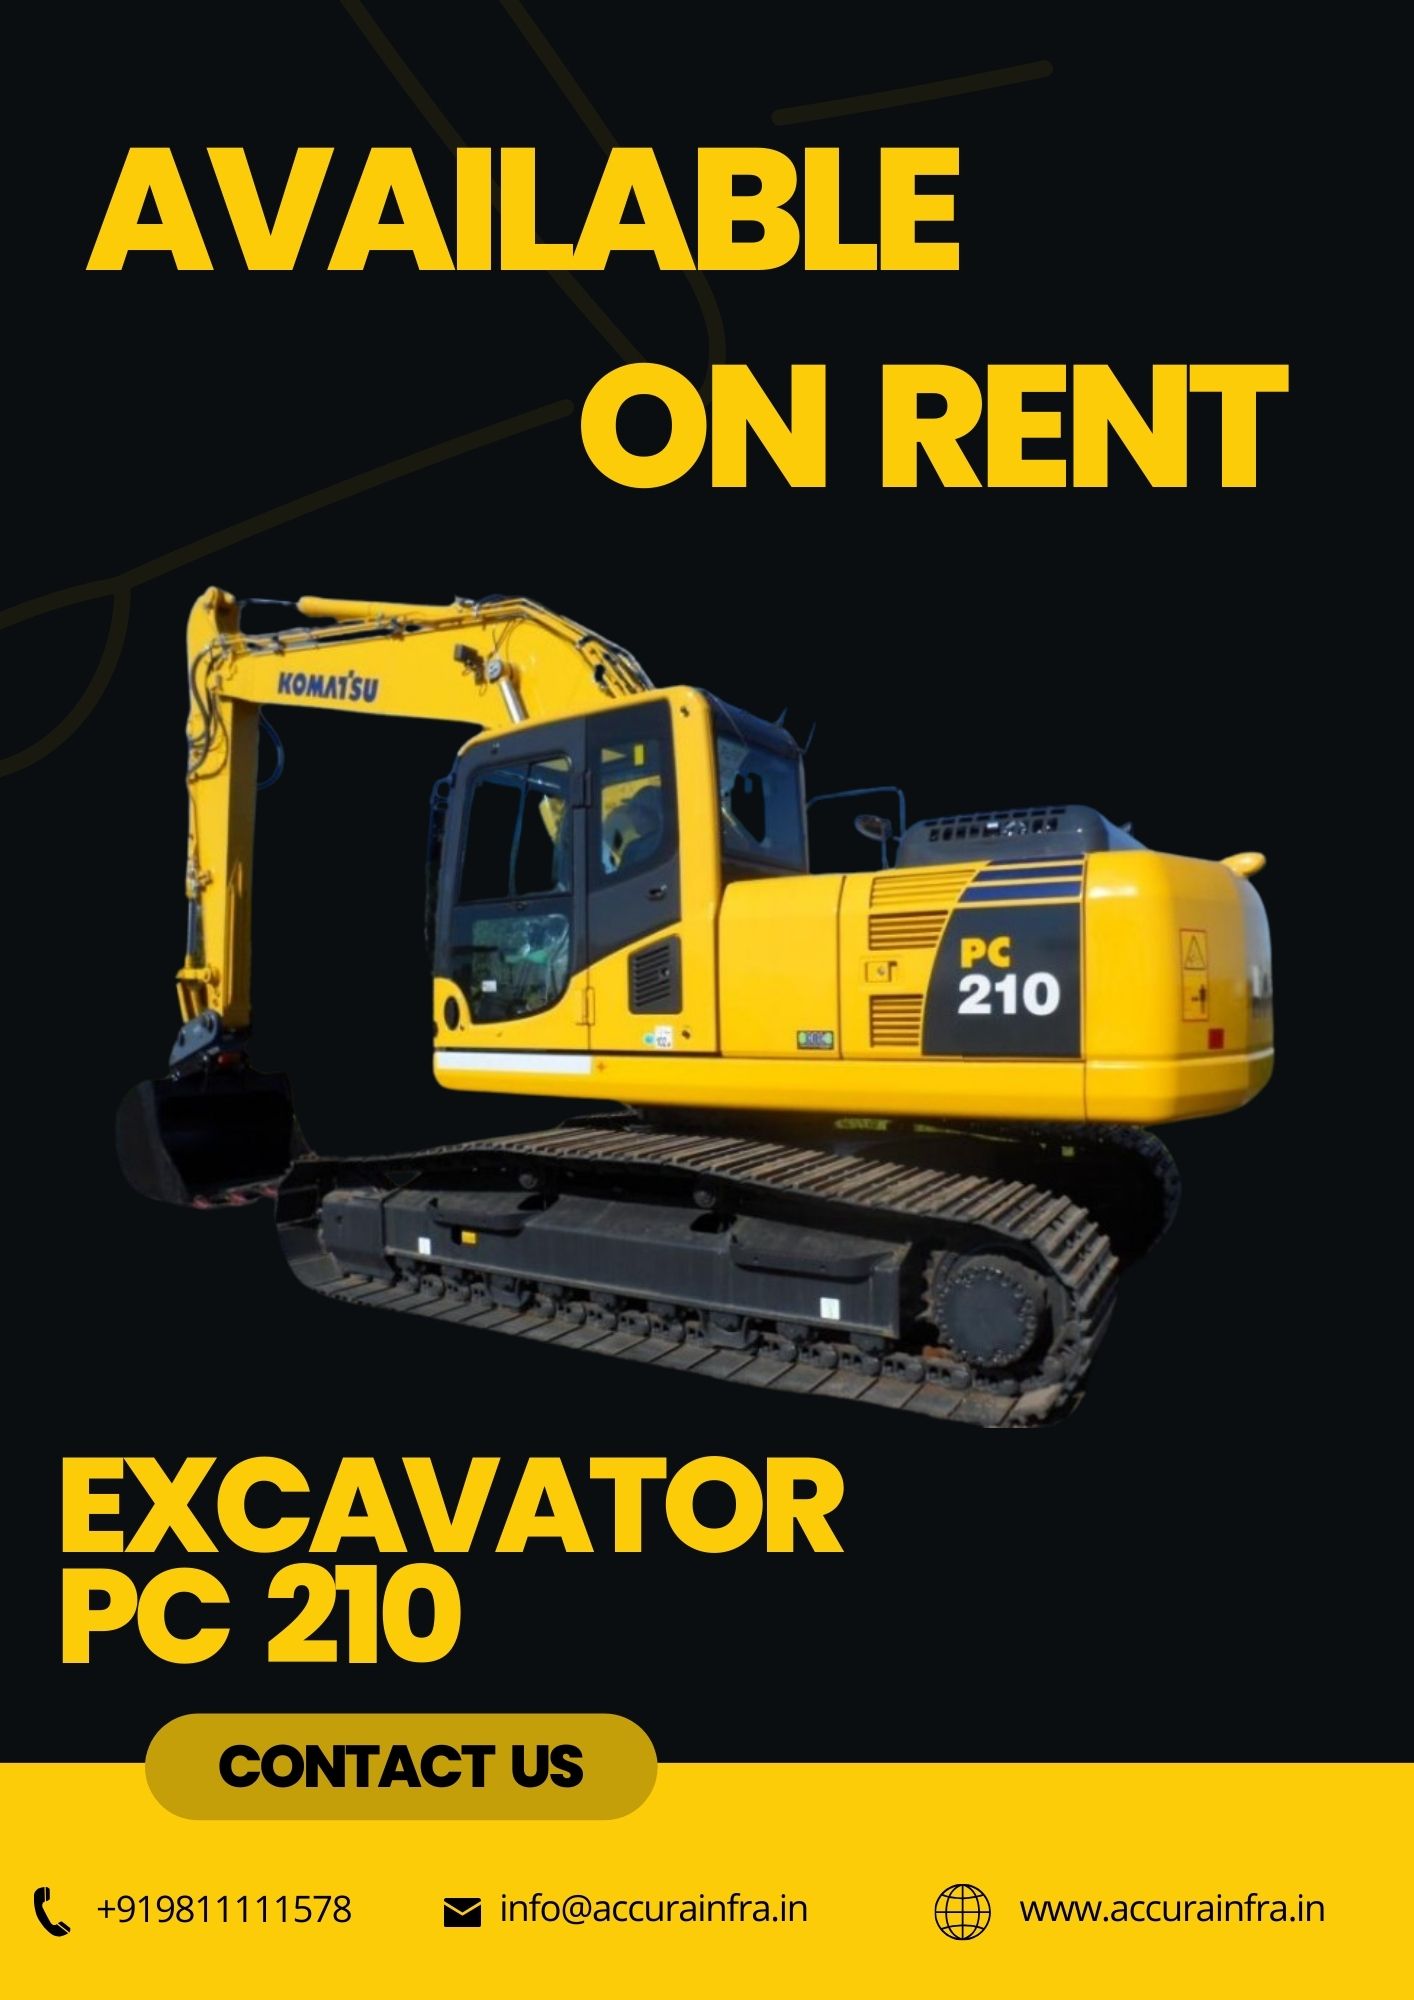 Why Excavators: The Ultimate Choice for Your Construction and Infrastructure Needs Image